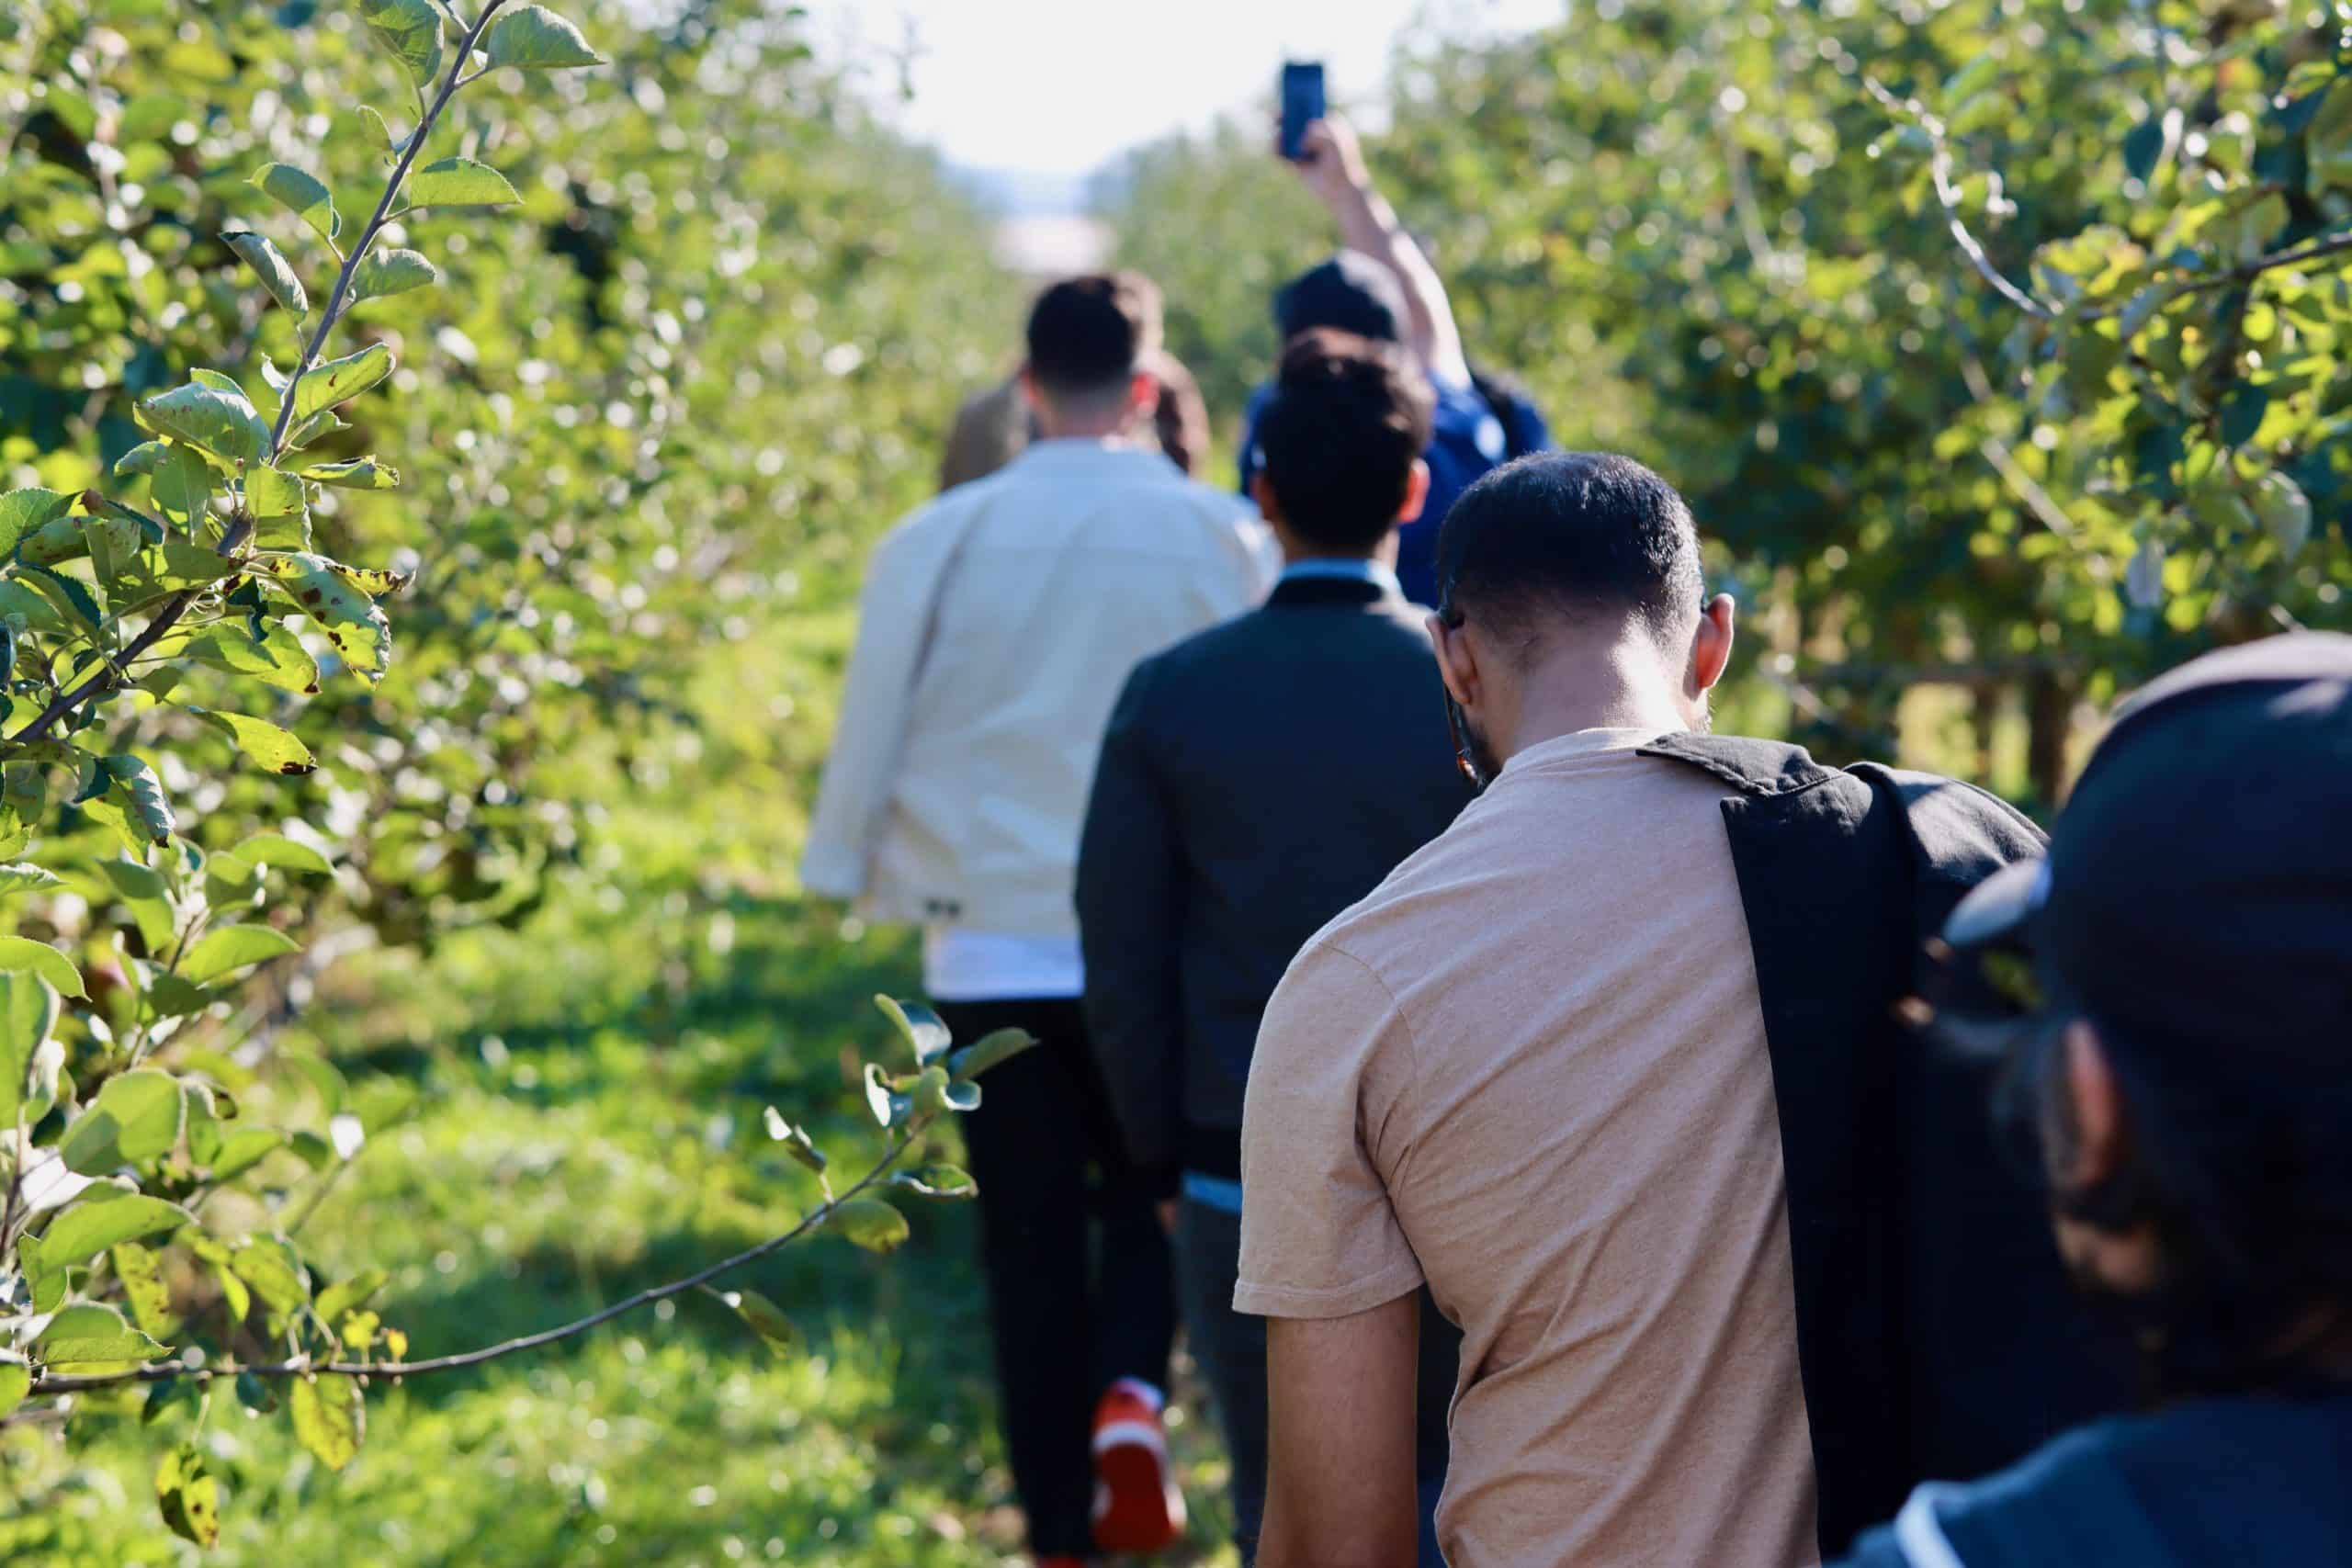 TUNE employees walk through an orchard row during the 2022 TUNE retreat